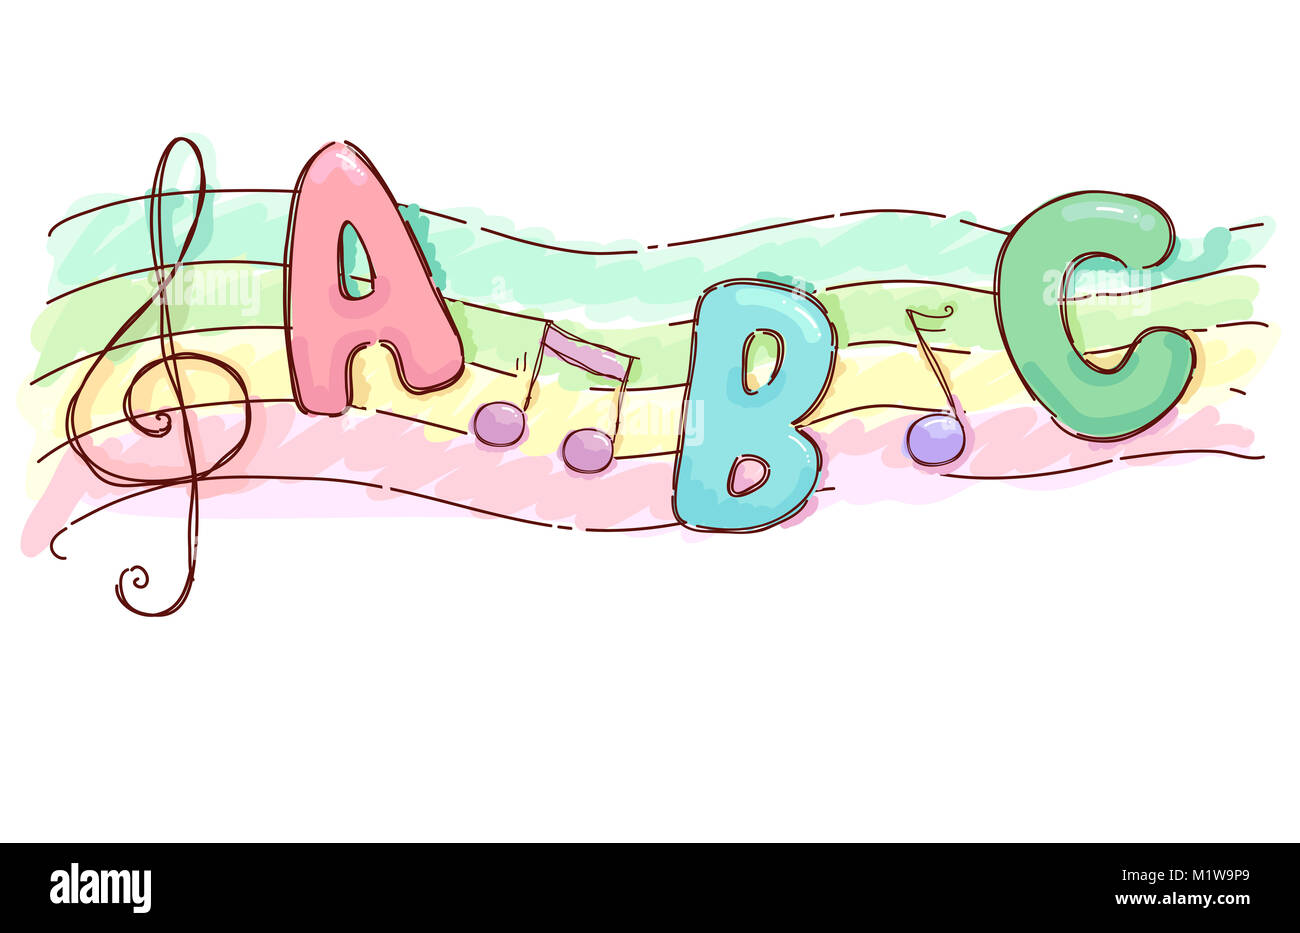 Colorful Illustration Featuring a Musical Scale Decorated With the Letters ABC and a G Clef Stock Photo